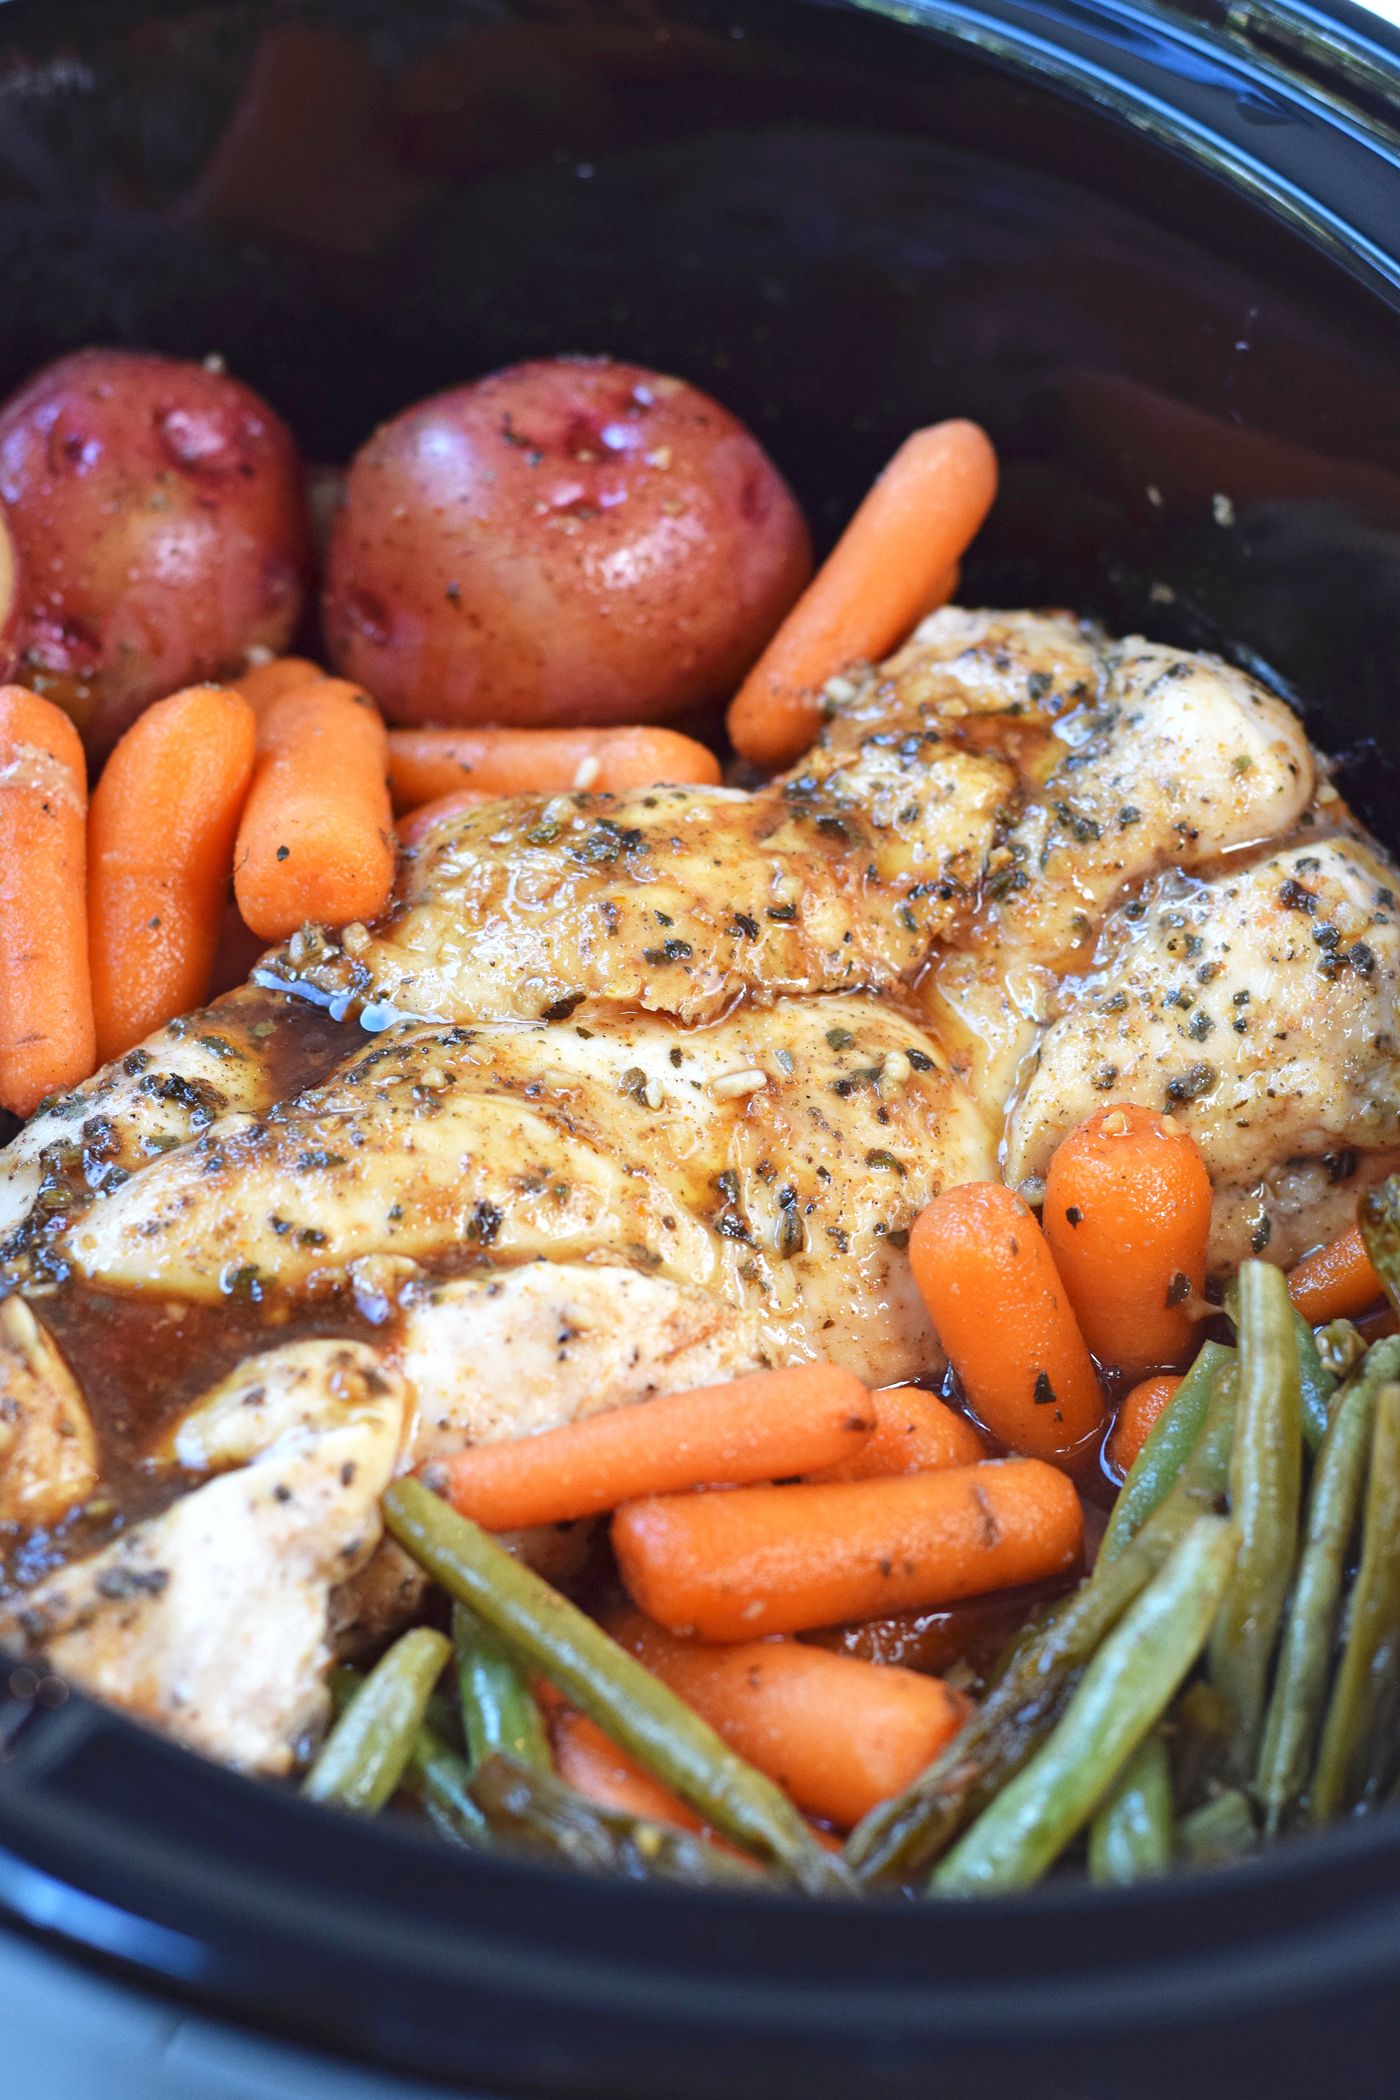 Healthy Crockpot Recipes Chicken And Vegetables